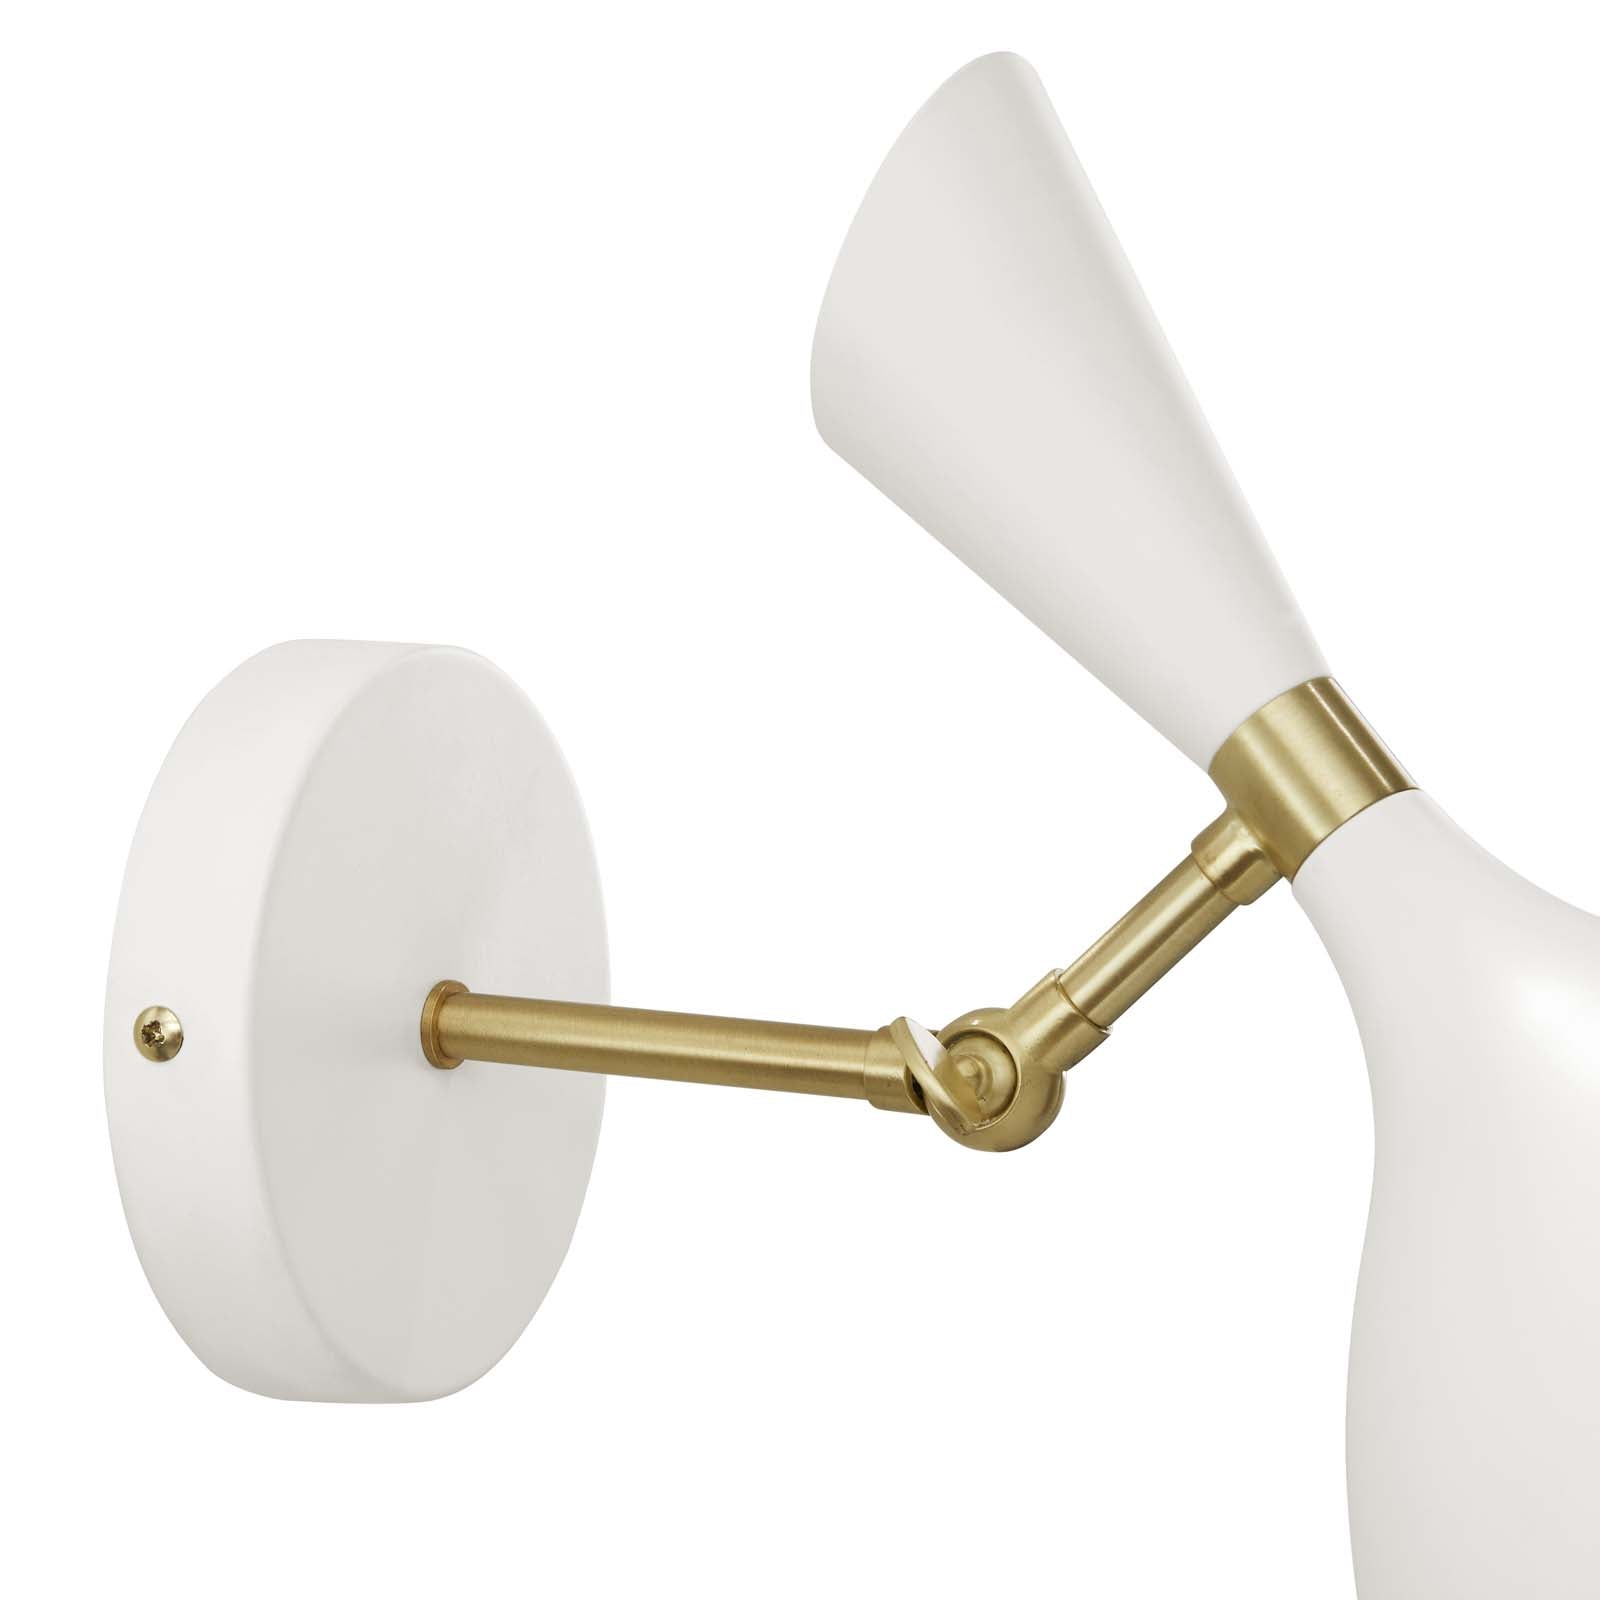 Modway Wall Sconces - Declare Adjustable Wall Sconce White